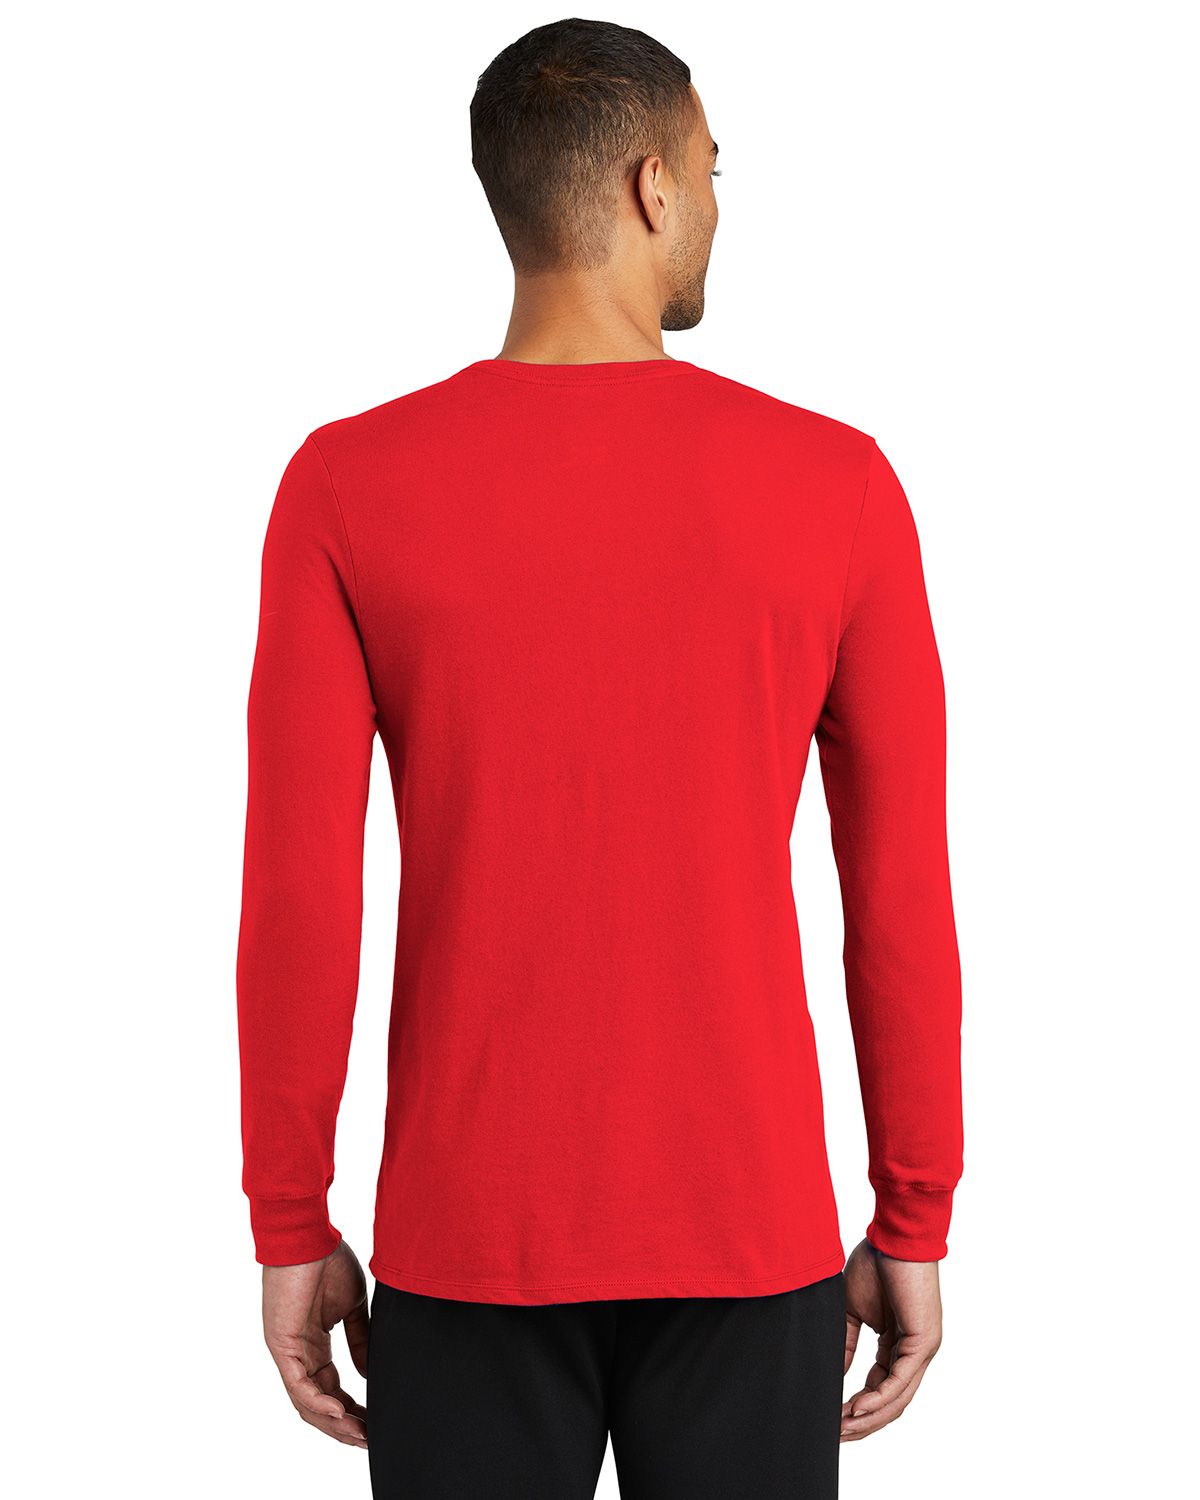 Reviews about Nike Golf NKBQ5230 Men's Dri-FIT Cotton/Poly Long Sleeve Tee